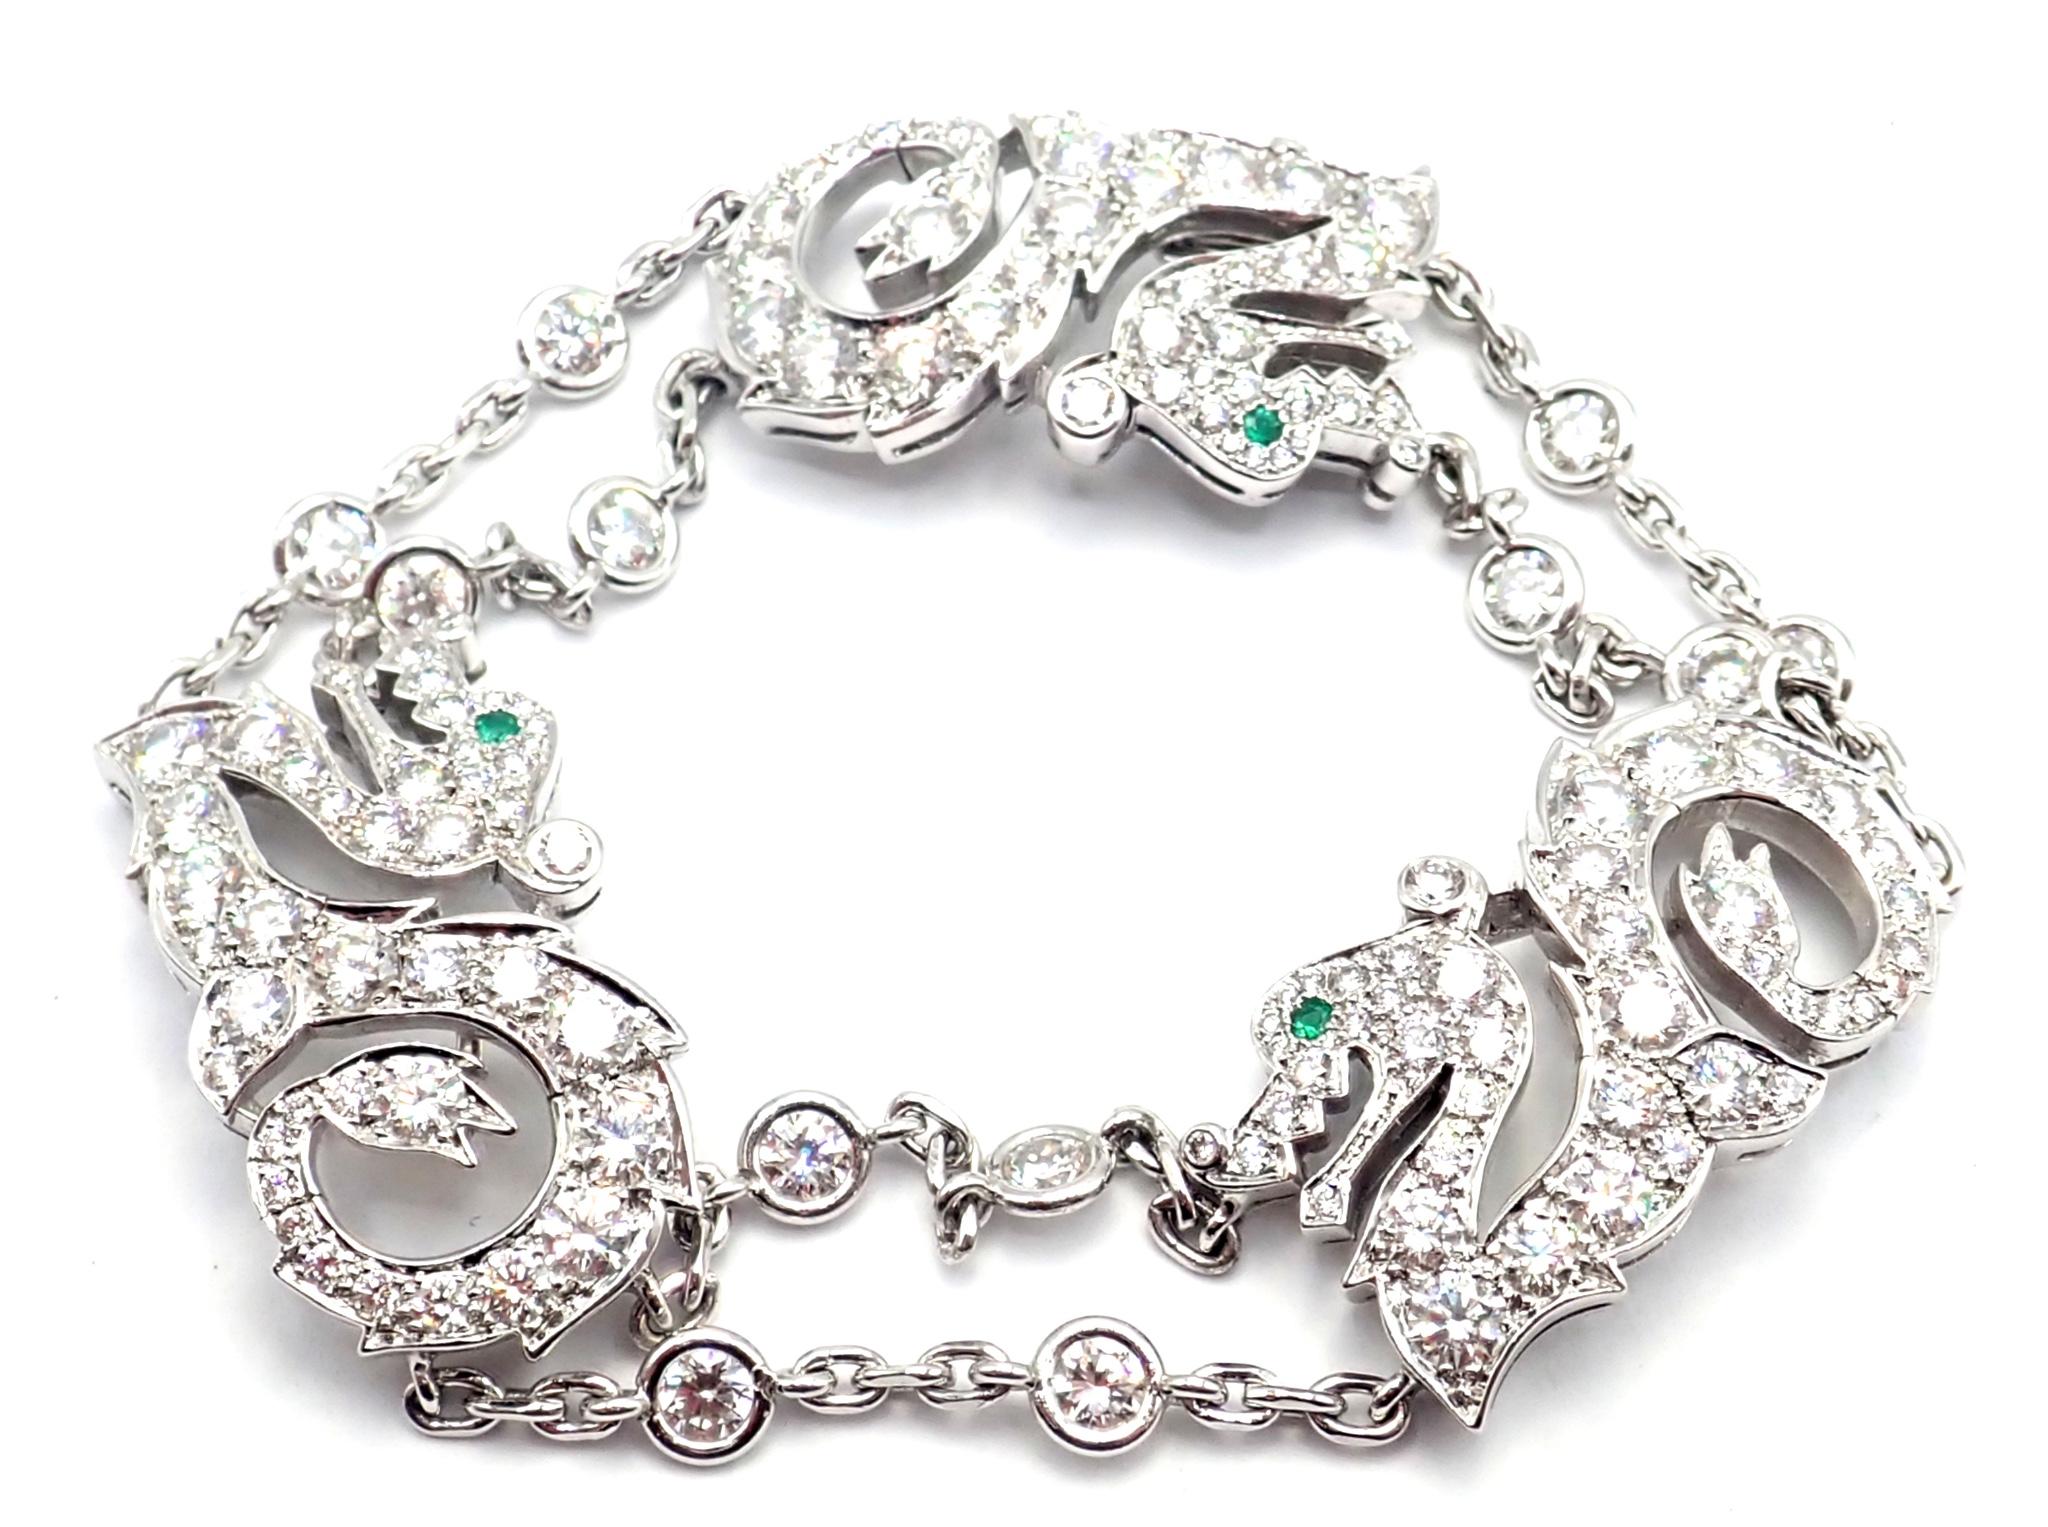 18k White Gold Diamond And Emerald Le Baiser Du Dragon Bracelet by Cartier. Ladies iconic Cartier bracelet featuring 3 dragons in 18k white gold. This bracelet features 3 dragons set with diamonds and green emeralds in the eyes. The dragons are